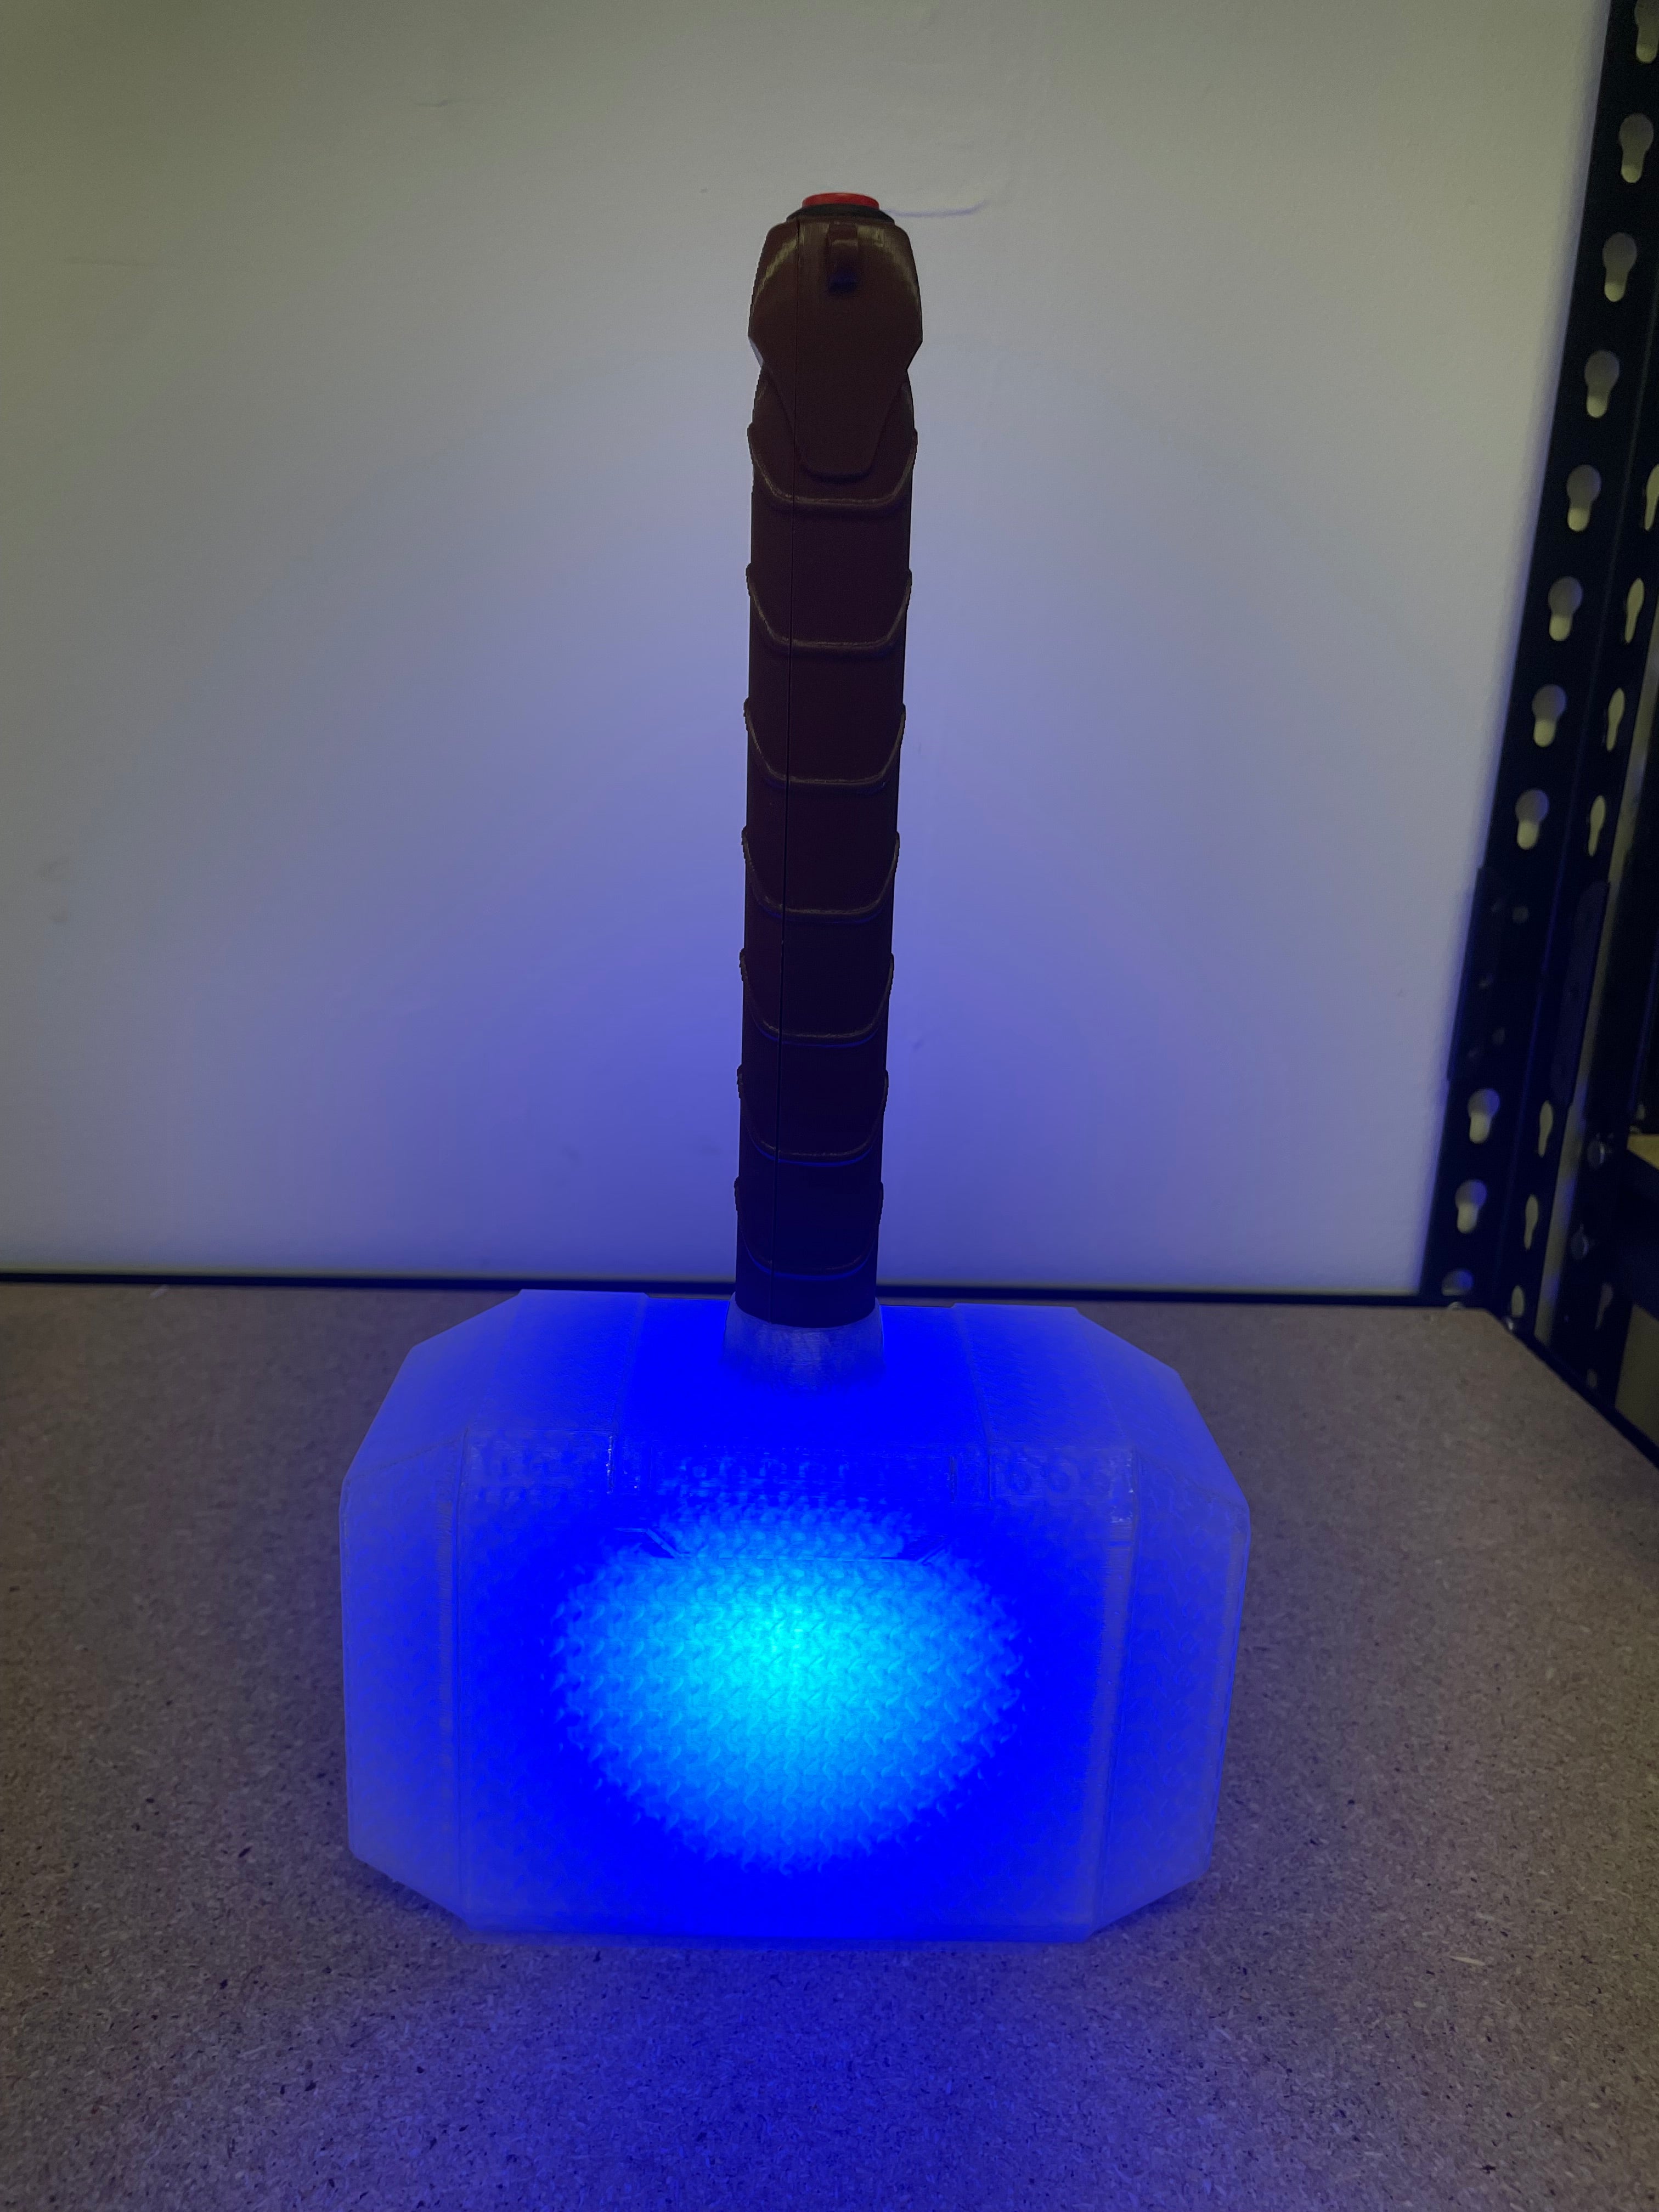 3D Printed Thor Hammer with Illuminated Switch